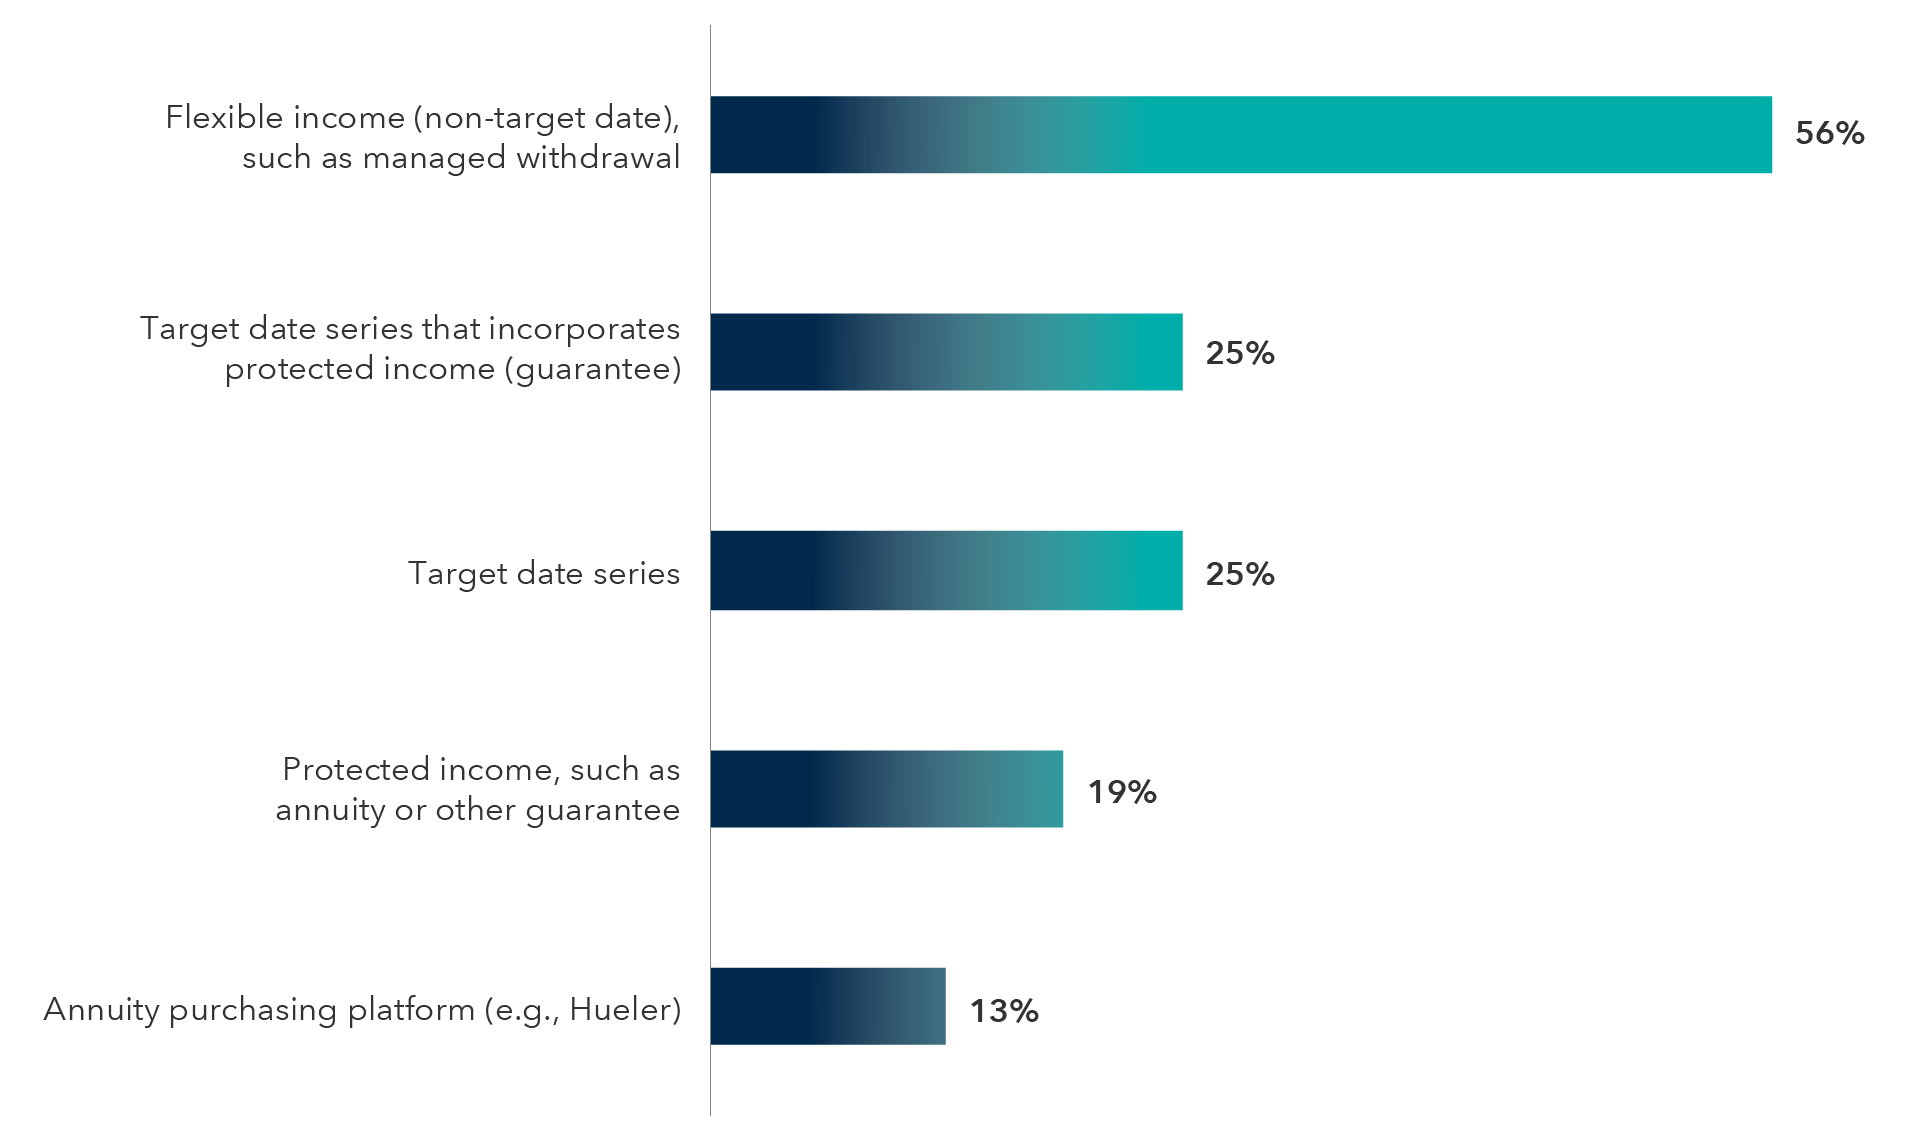 This horizontal bar chart shows defined contribution plan sponsors’ responses to the question: “What best describes your DC plan’s retirement income options?” Flexible income (non-target date), such as managed withdrawal: 56%; target date series that incorporates protected (guarantee): 25%; target date series: 25%; protected income, such as an annuity or other guarantee (19%); and annuity purchasing platform (e.g., Hueler): 13%.